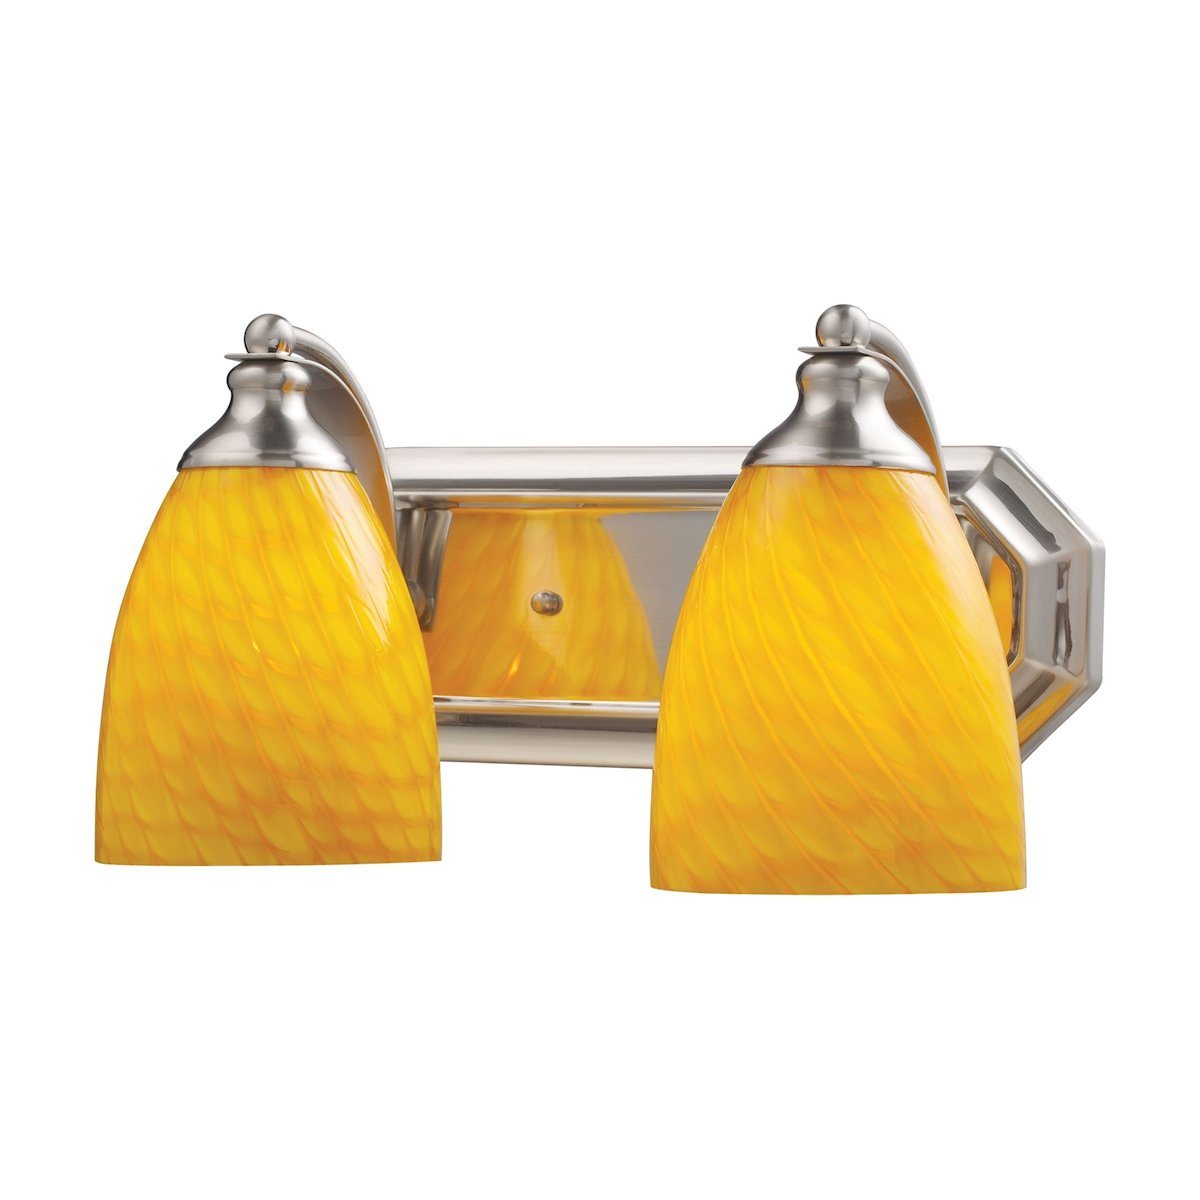 Bath And Spa 2 Light Vanity In Satin Nickel And Canary Glass Wall Elk Lighting 